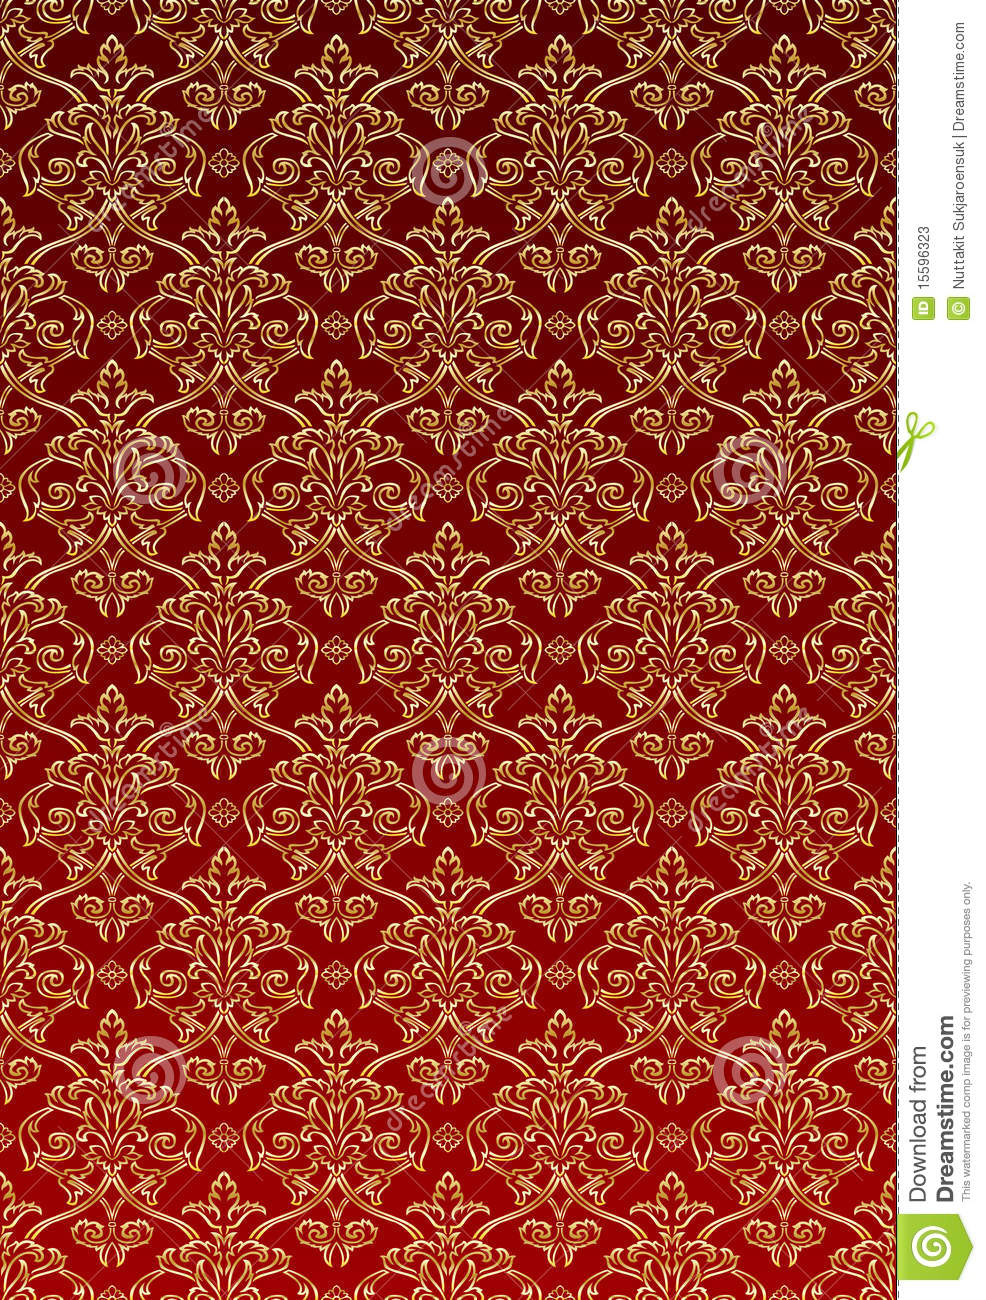 Free Download Red And Gold Damask Wallpaper Gold Damask